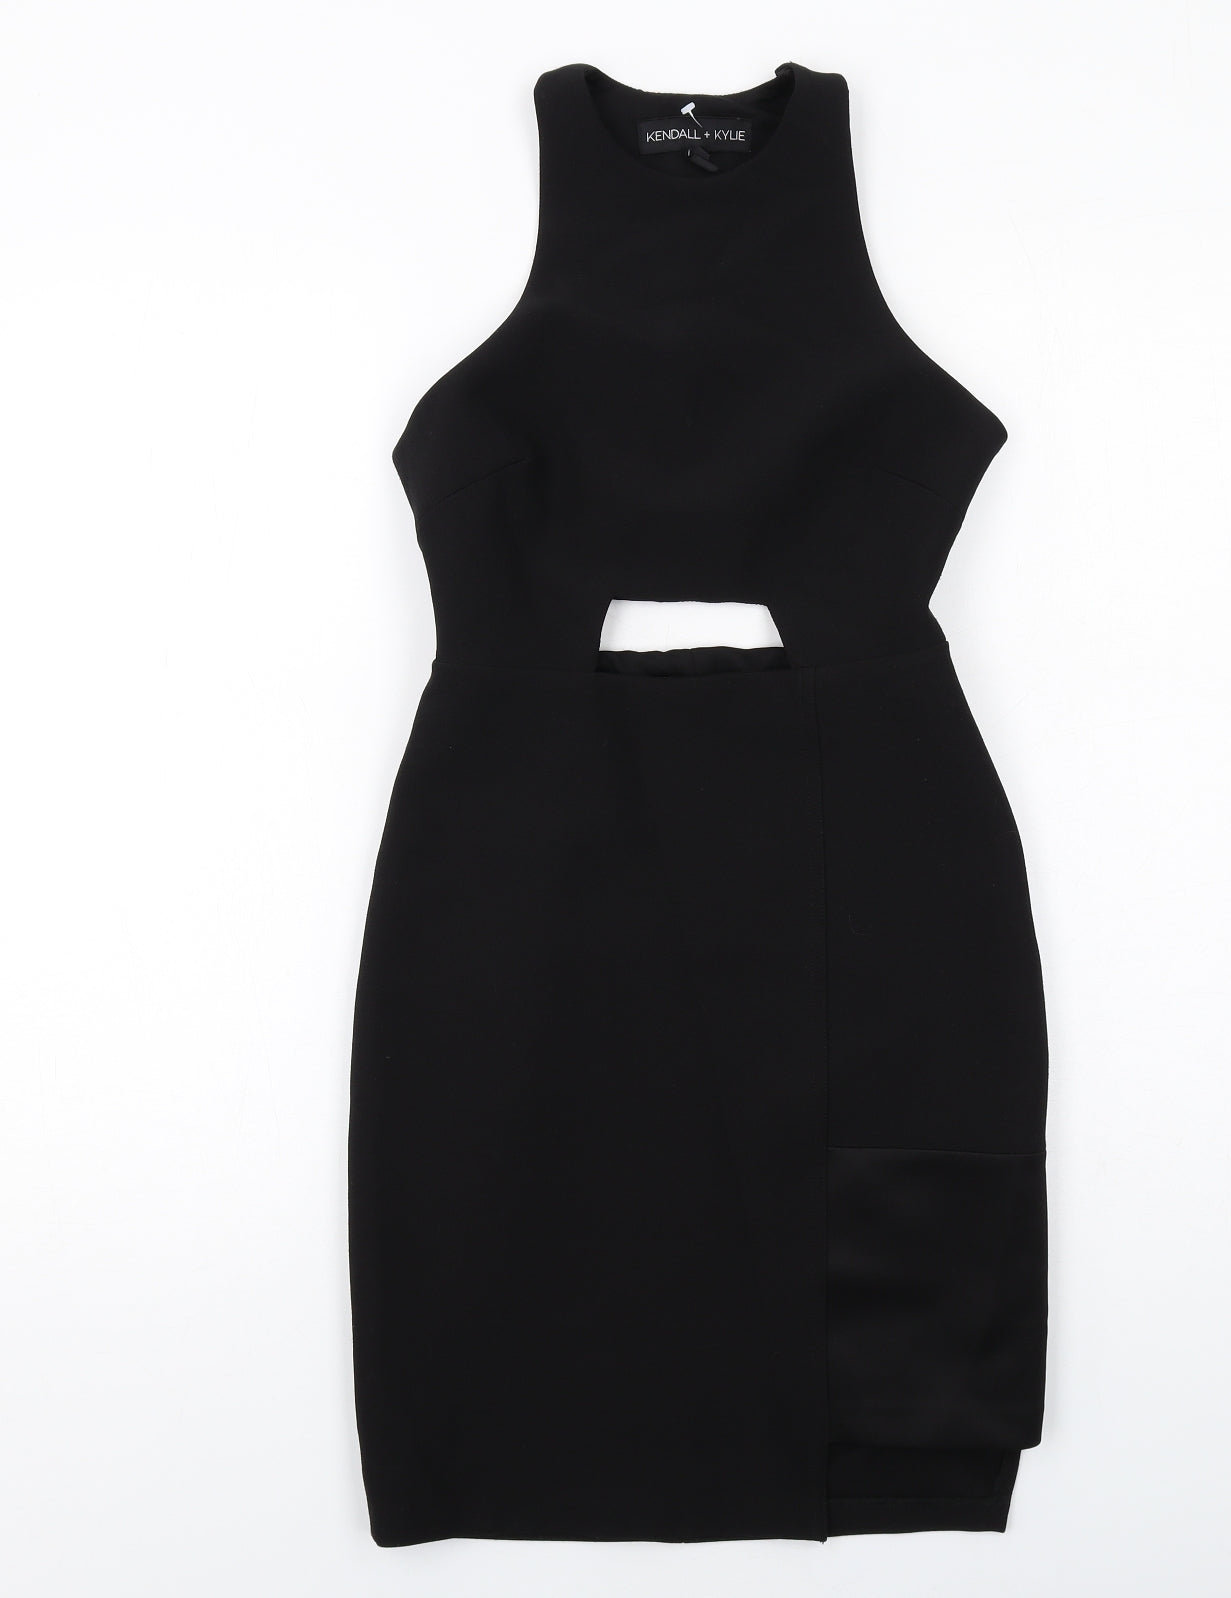 Kendall And Kylie Womens Black Polyester Bodycon Size 6 Round Neck Zip